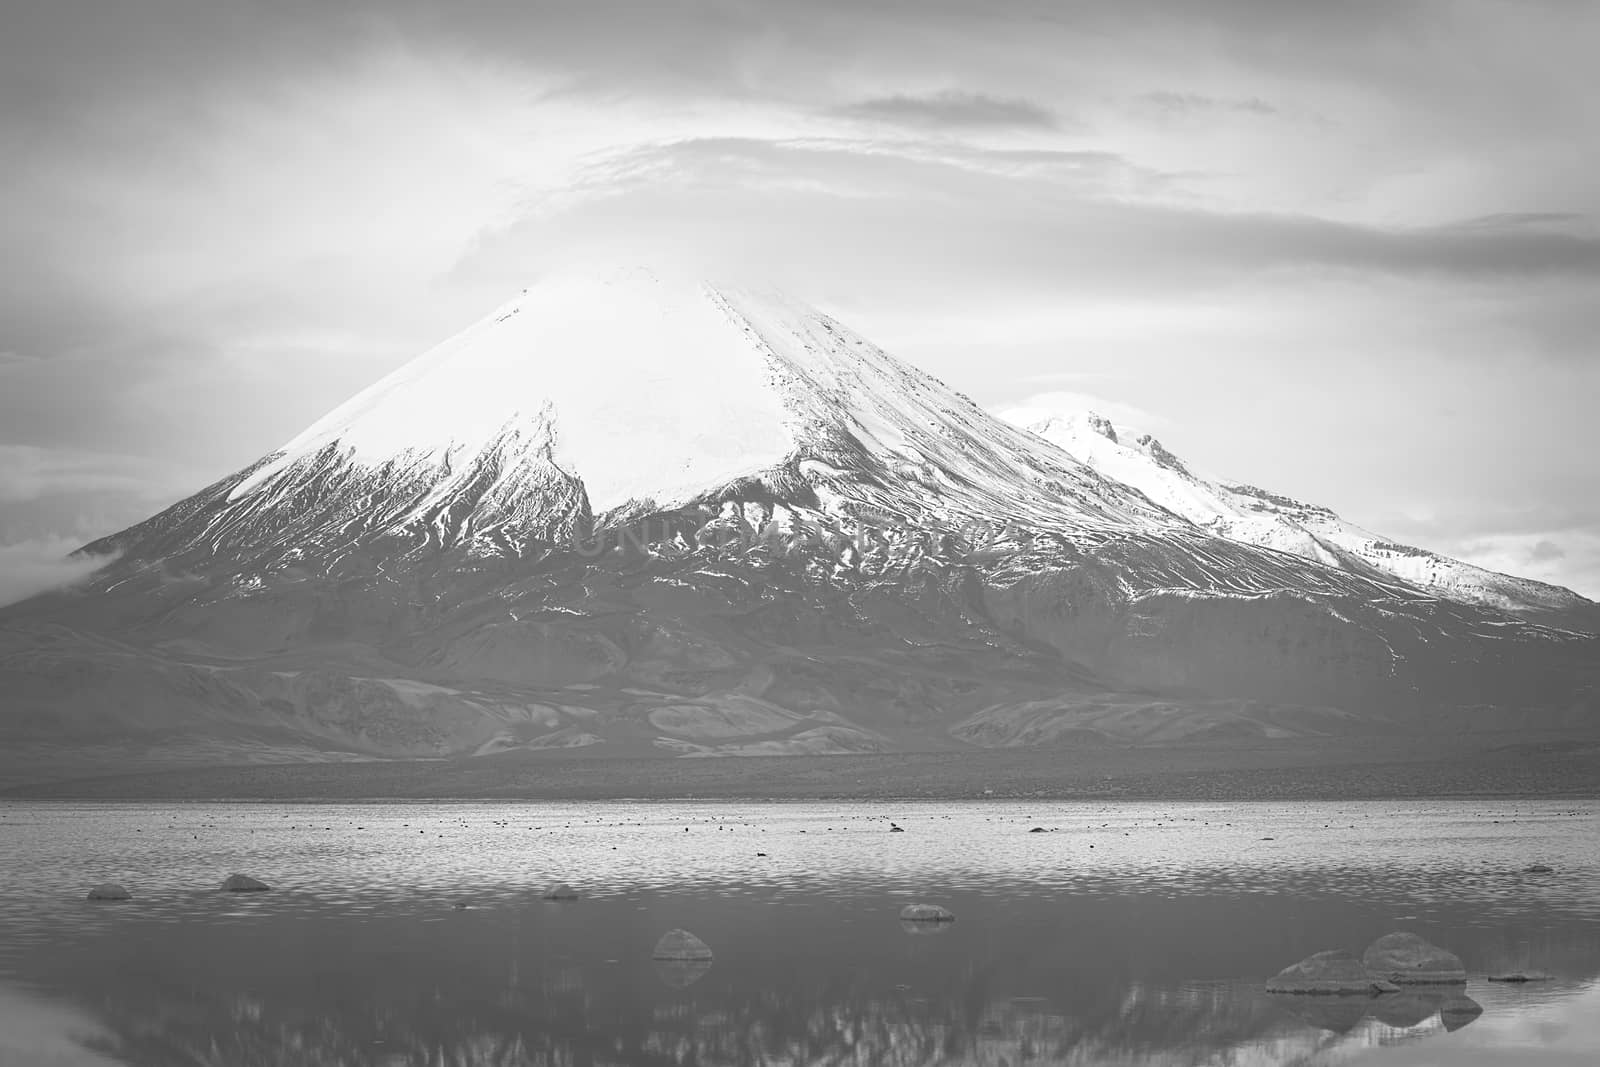 Parinacota stratovolcano (6348 meters) and Chungara Lake on the border of Chile and Bolivia on the way from La Paz to Arica. Parinacota is part of the Payachata volcanic group in Northern Chile. (Monochrome Image)